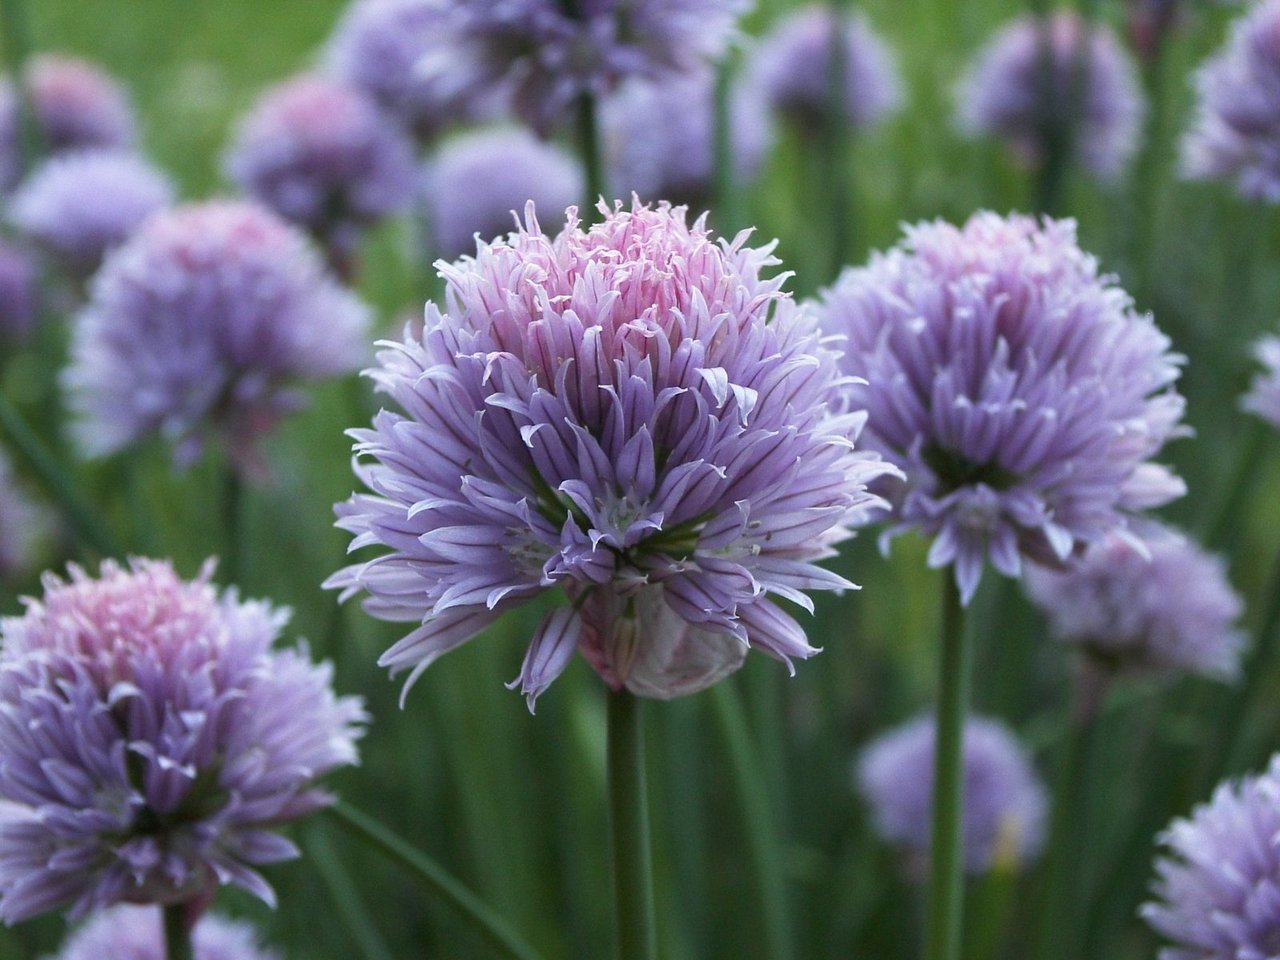 chives blooming-chive blooms-chive blossom vinegar